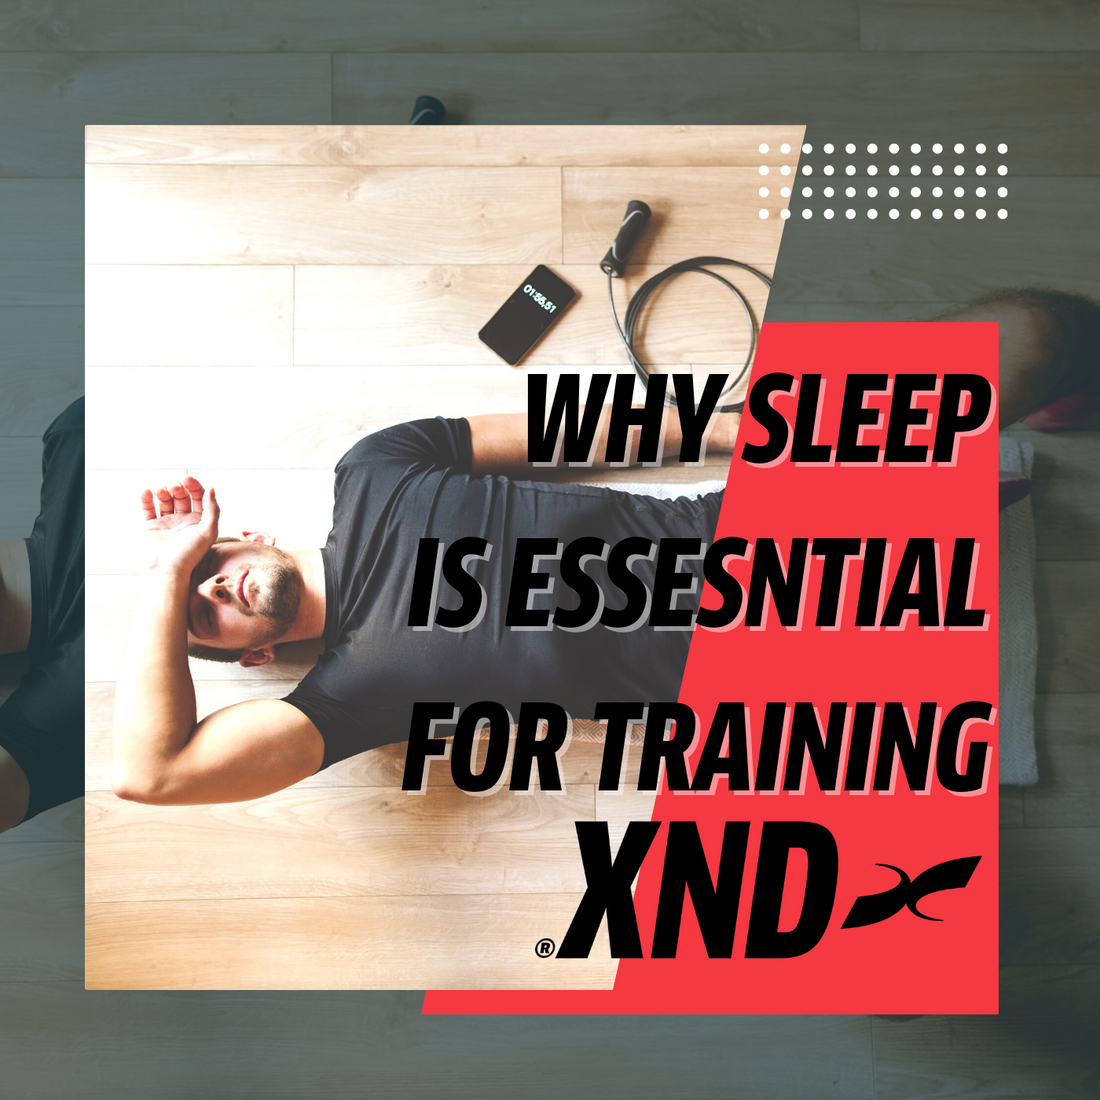 Why sleep is essential for training